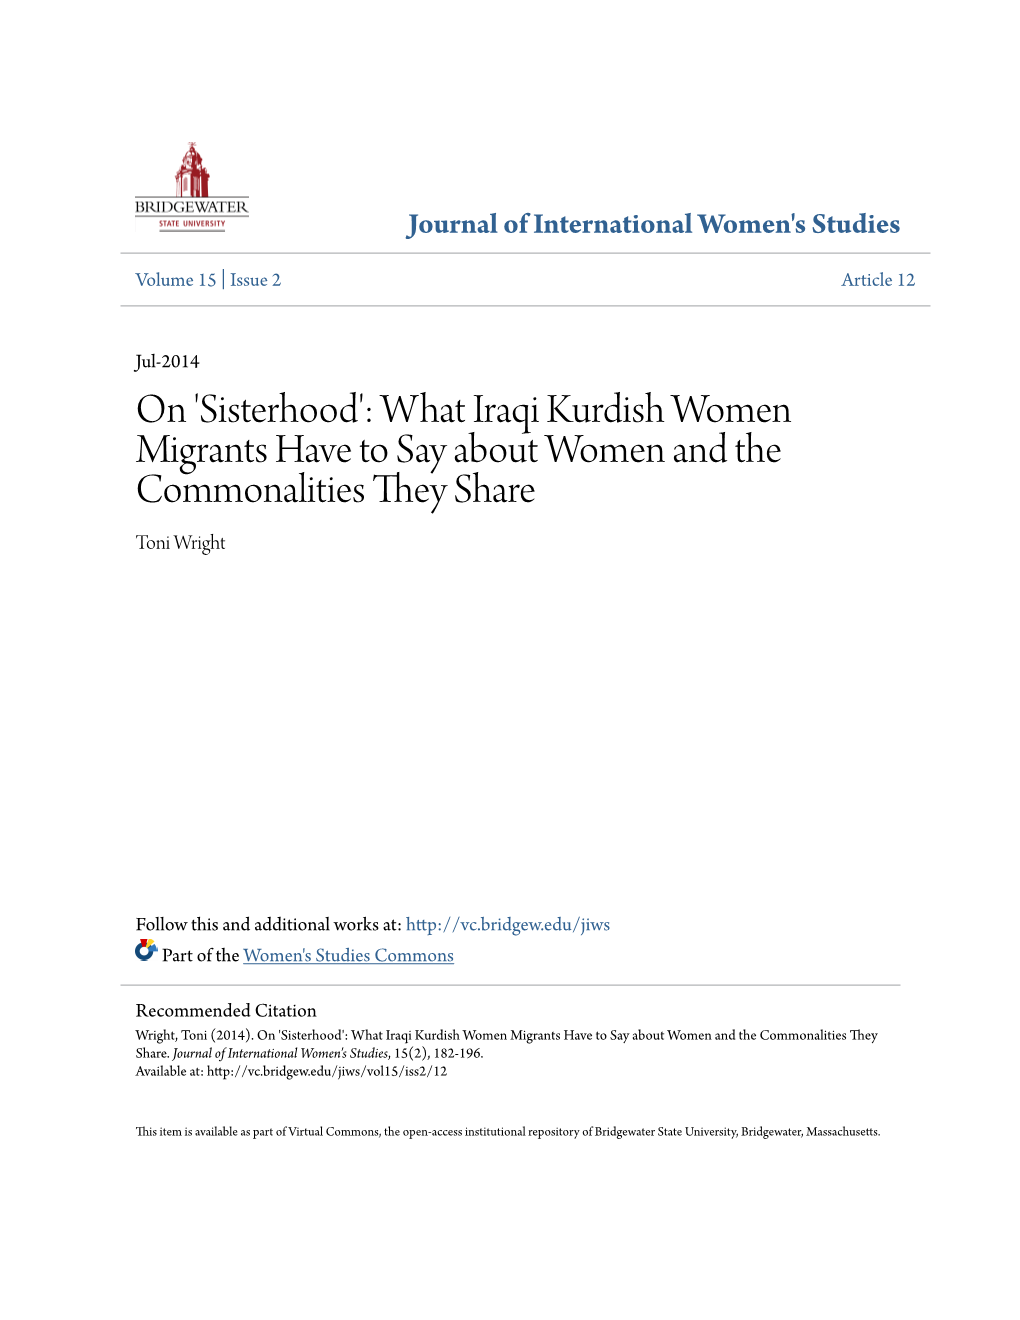 On 'Sisterhood': What Iraqi Kurdish Women Migrants Have to Say About Women and the Commonalities They Share Toni Wright